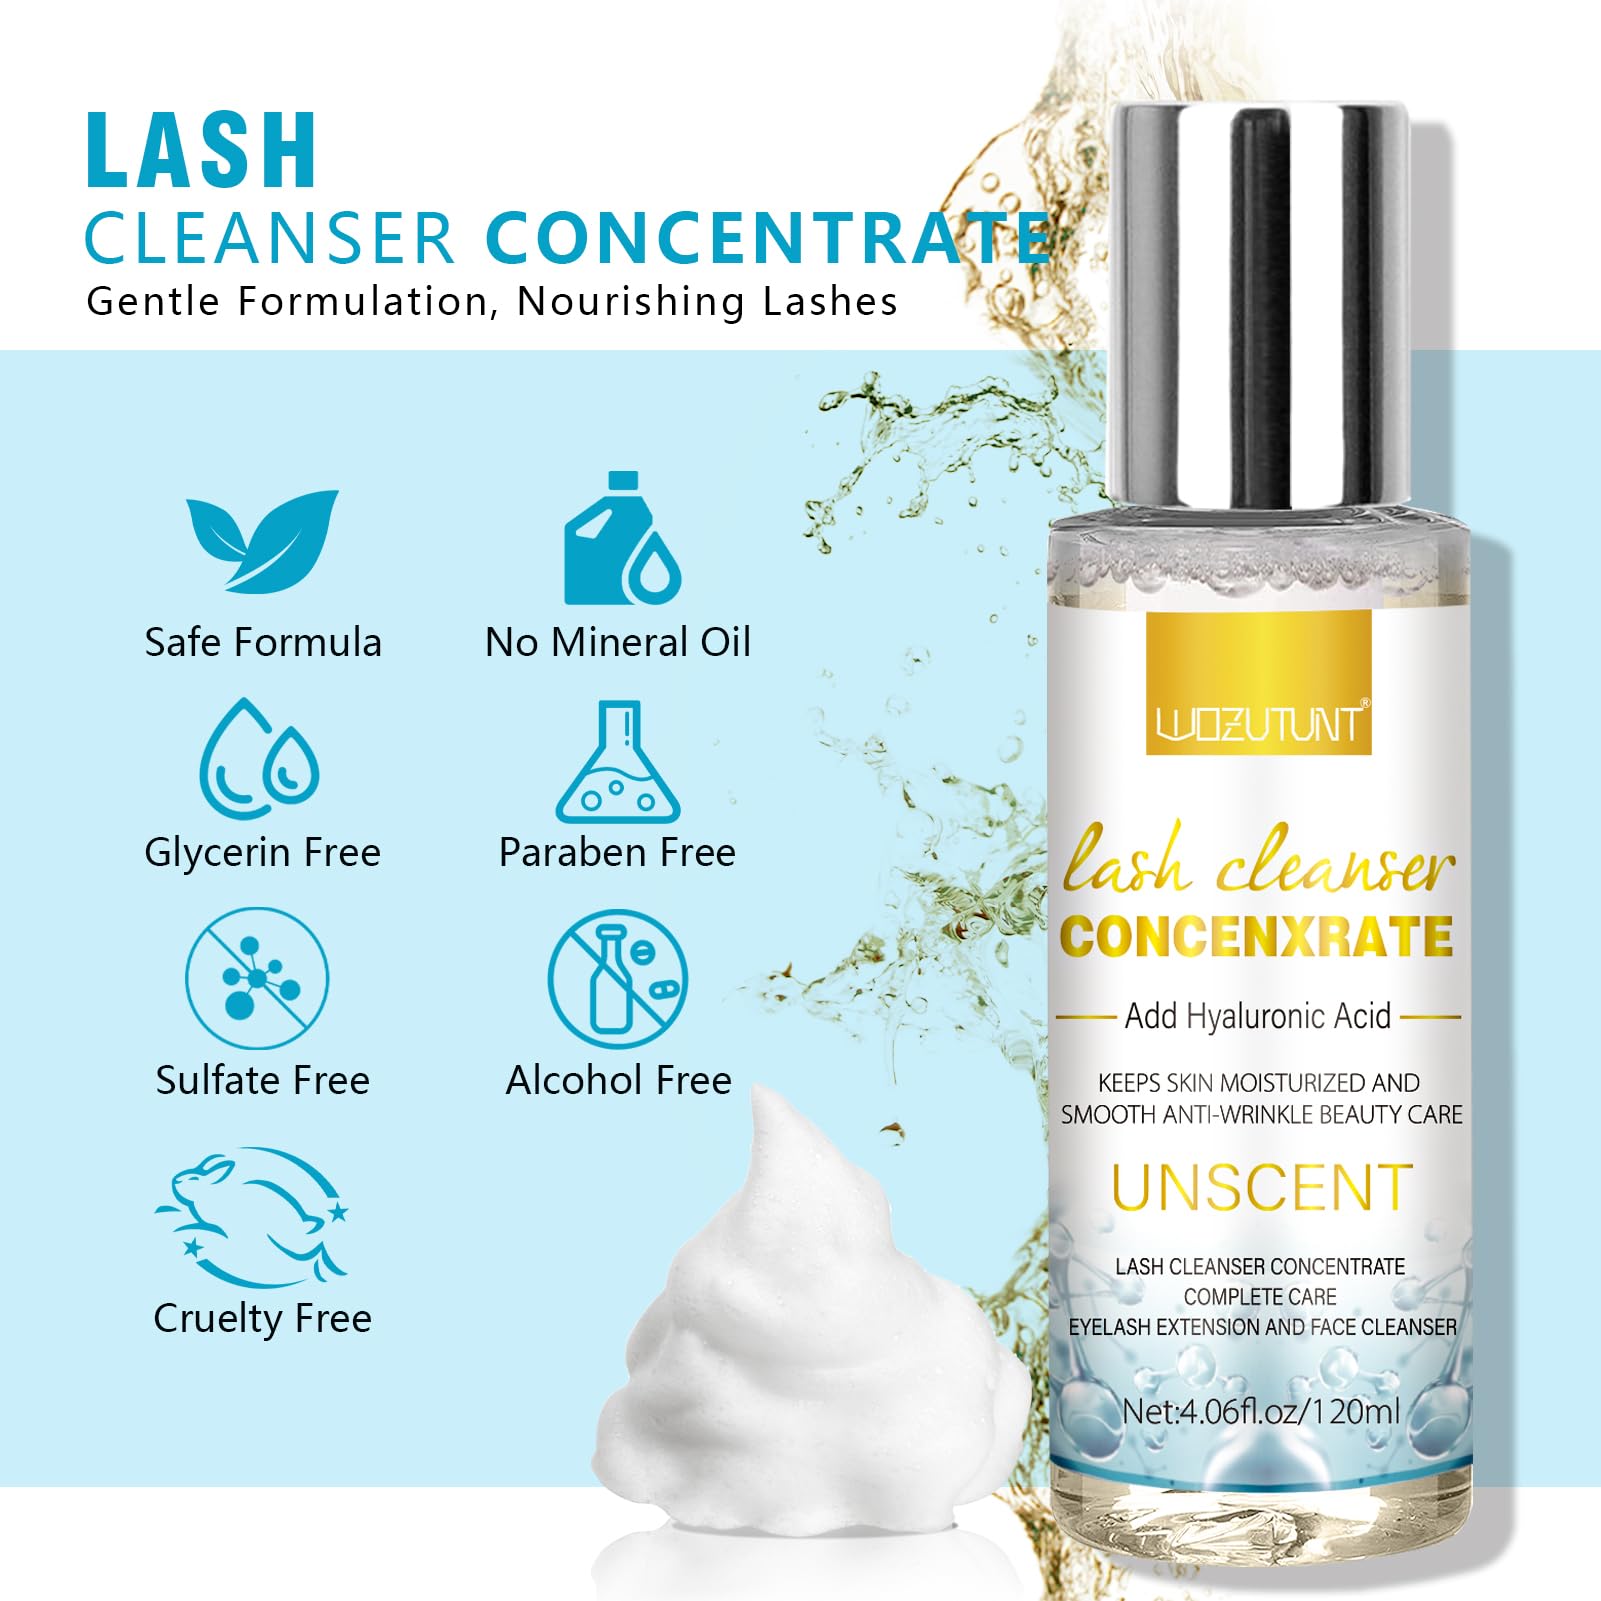 120ML Lash Shampoo Concentrate for Lash Extensions Ser